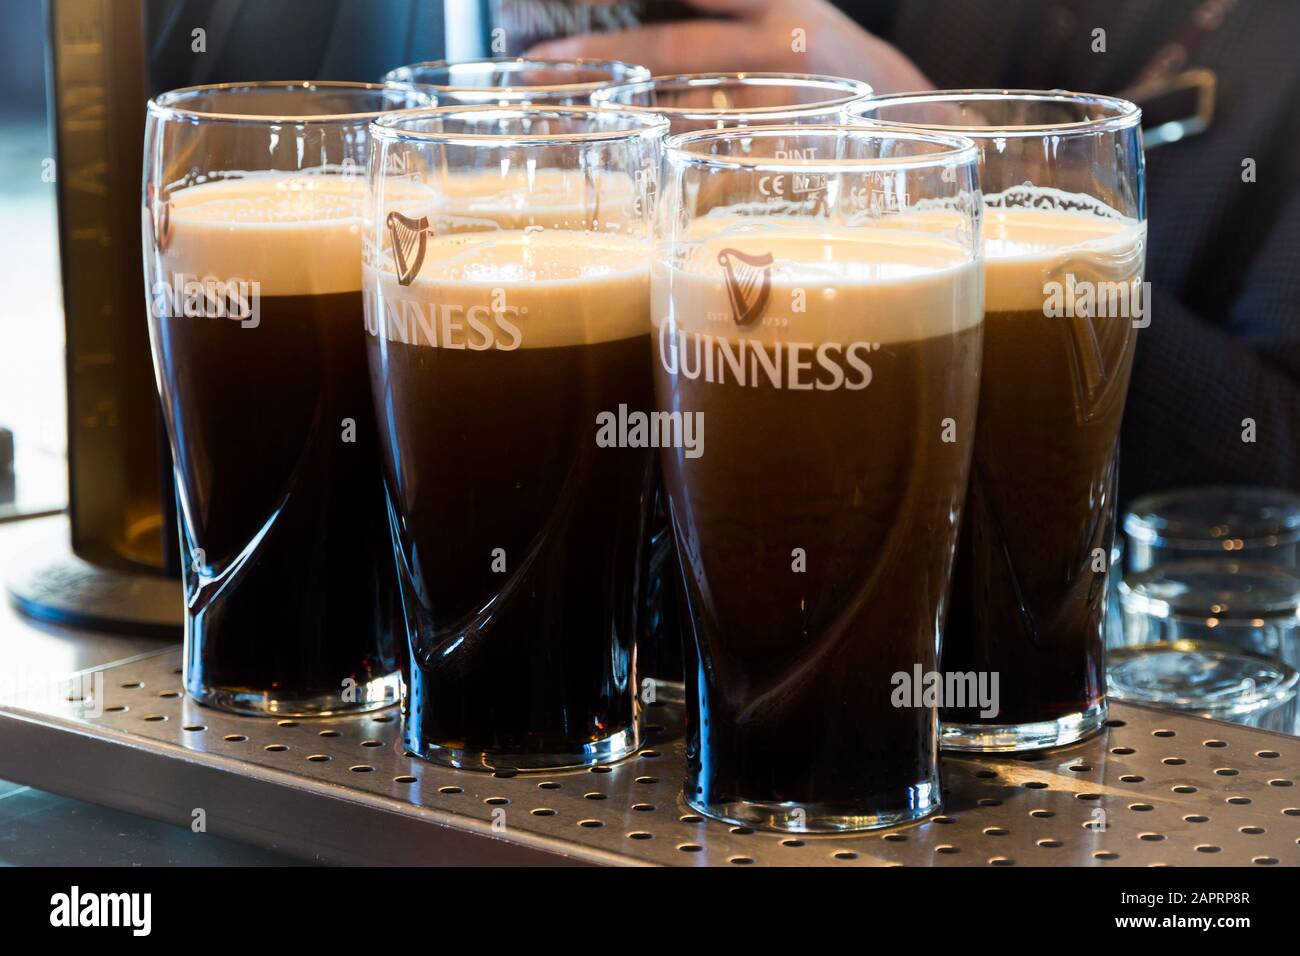 DUBLIN, IRELAND - FEB 15, 2014: Pints of Guinness are being served in a pub in Dublin, Ireland Stock Photo